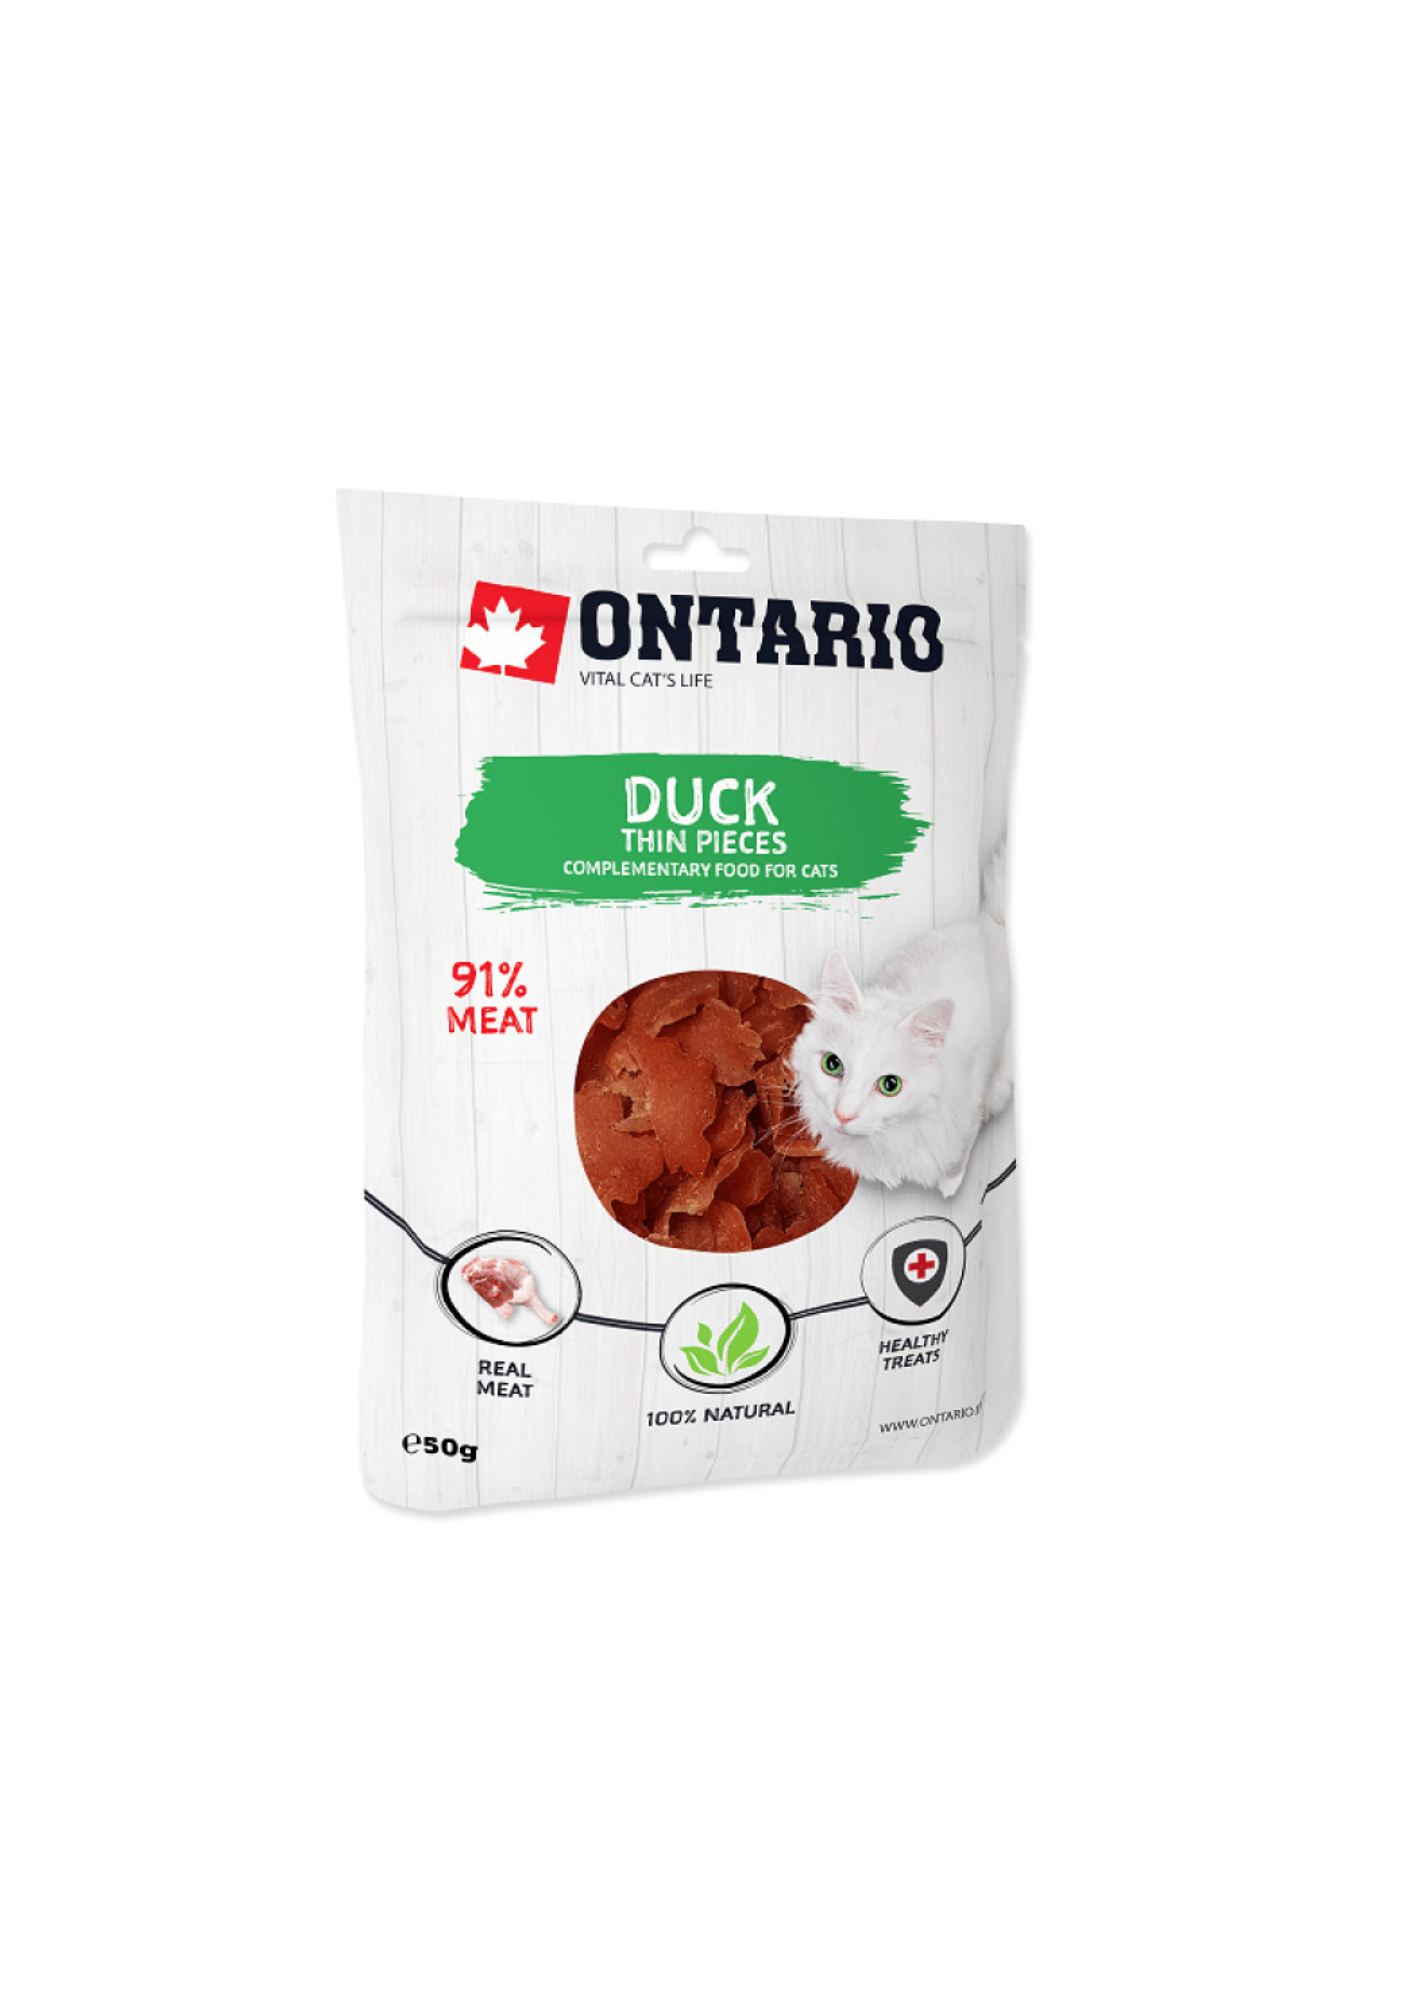 Ontario Cat Treats with Duck, Thin Pieces, 50 g